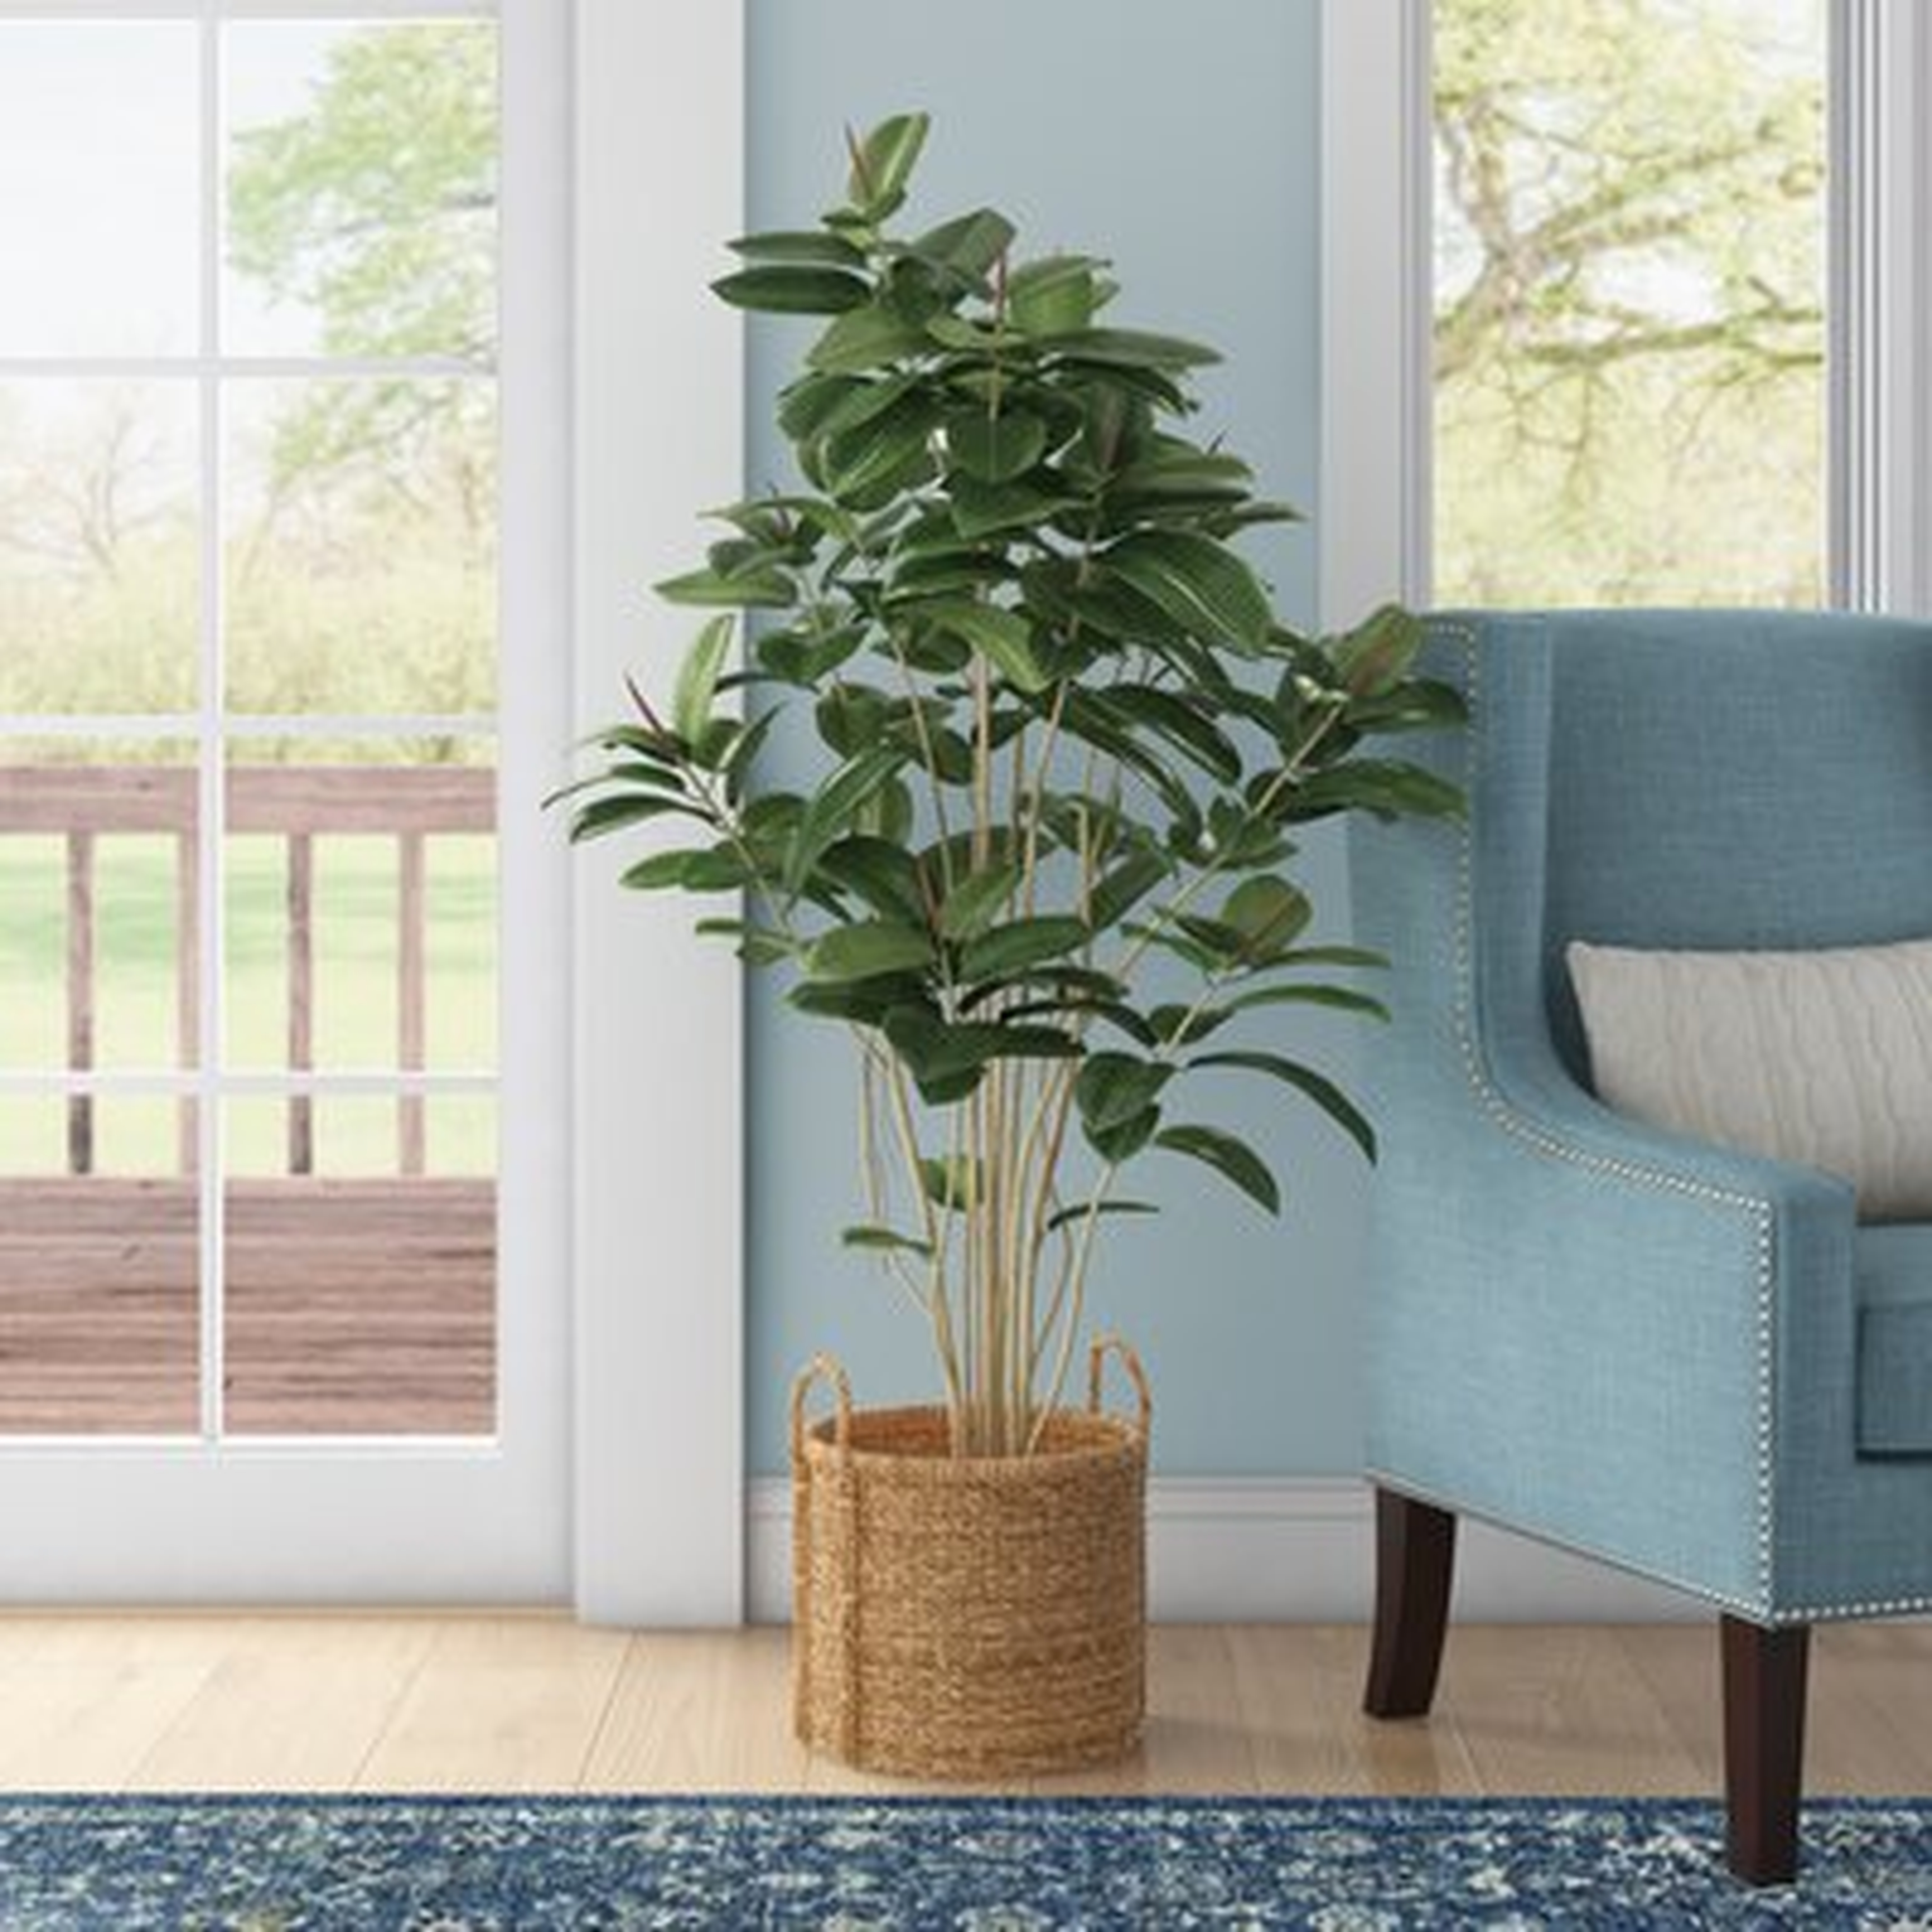 Potted Artificial Green Rubber Tree - Birch Lane